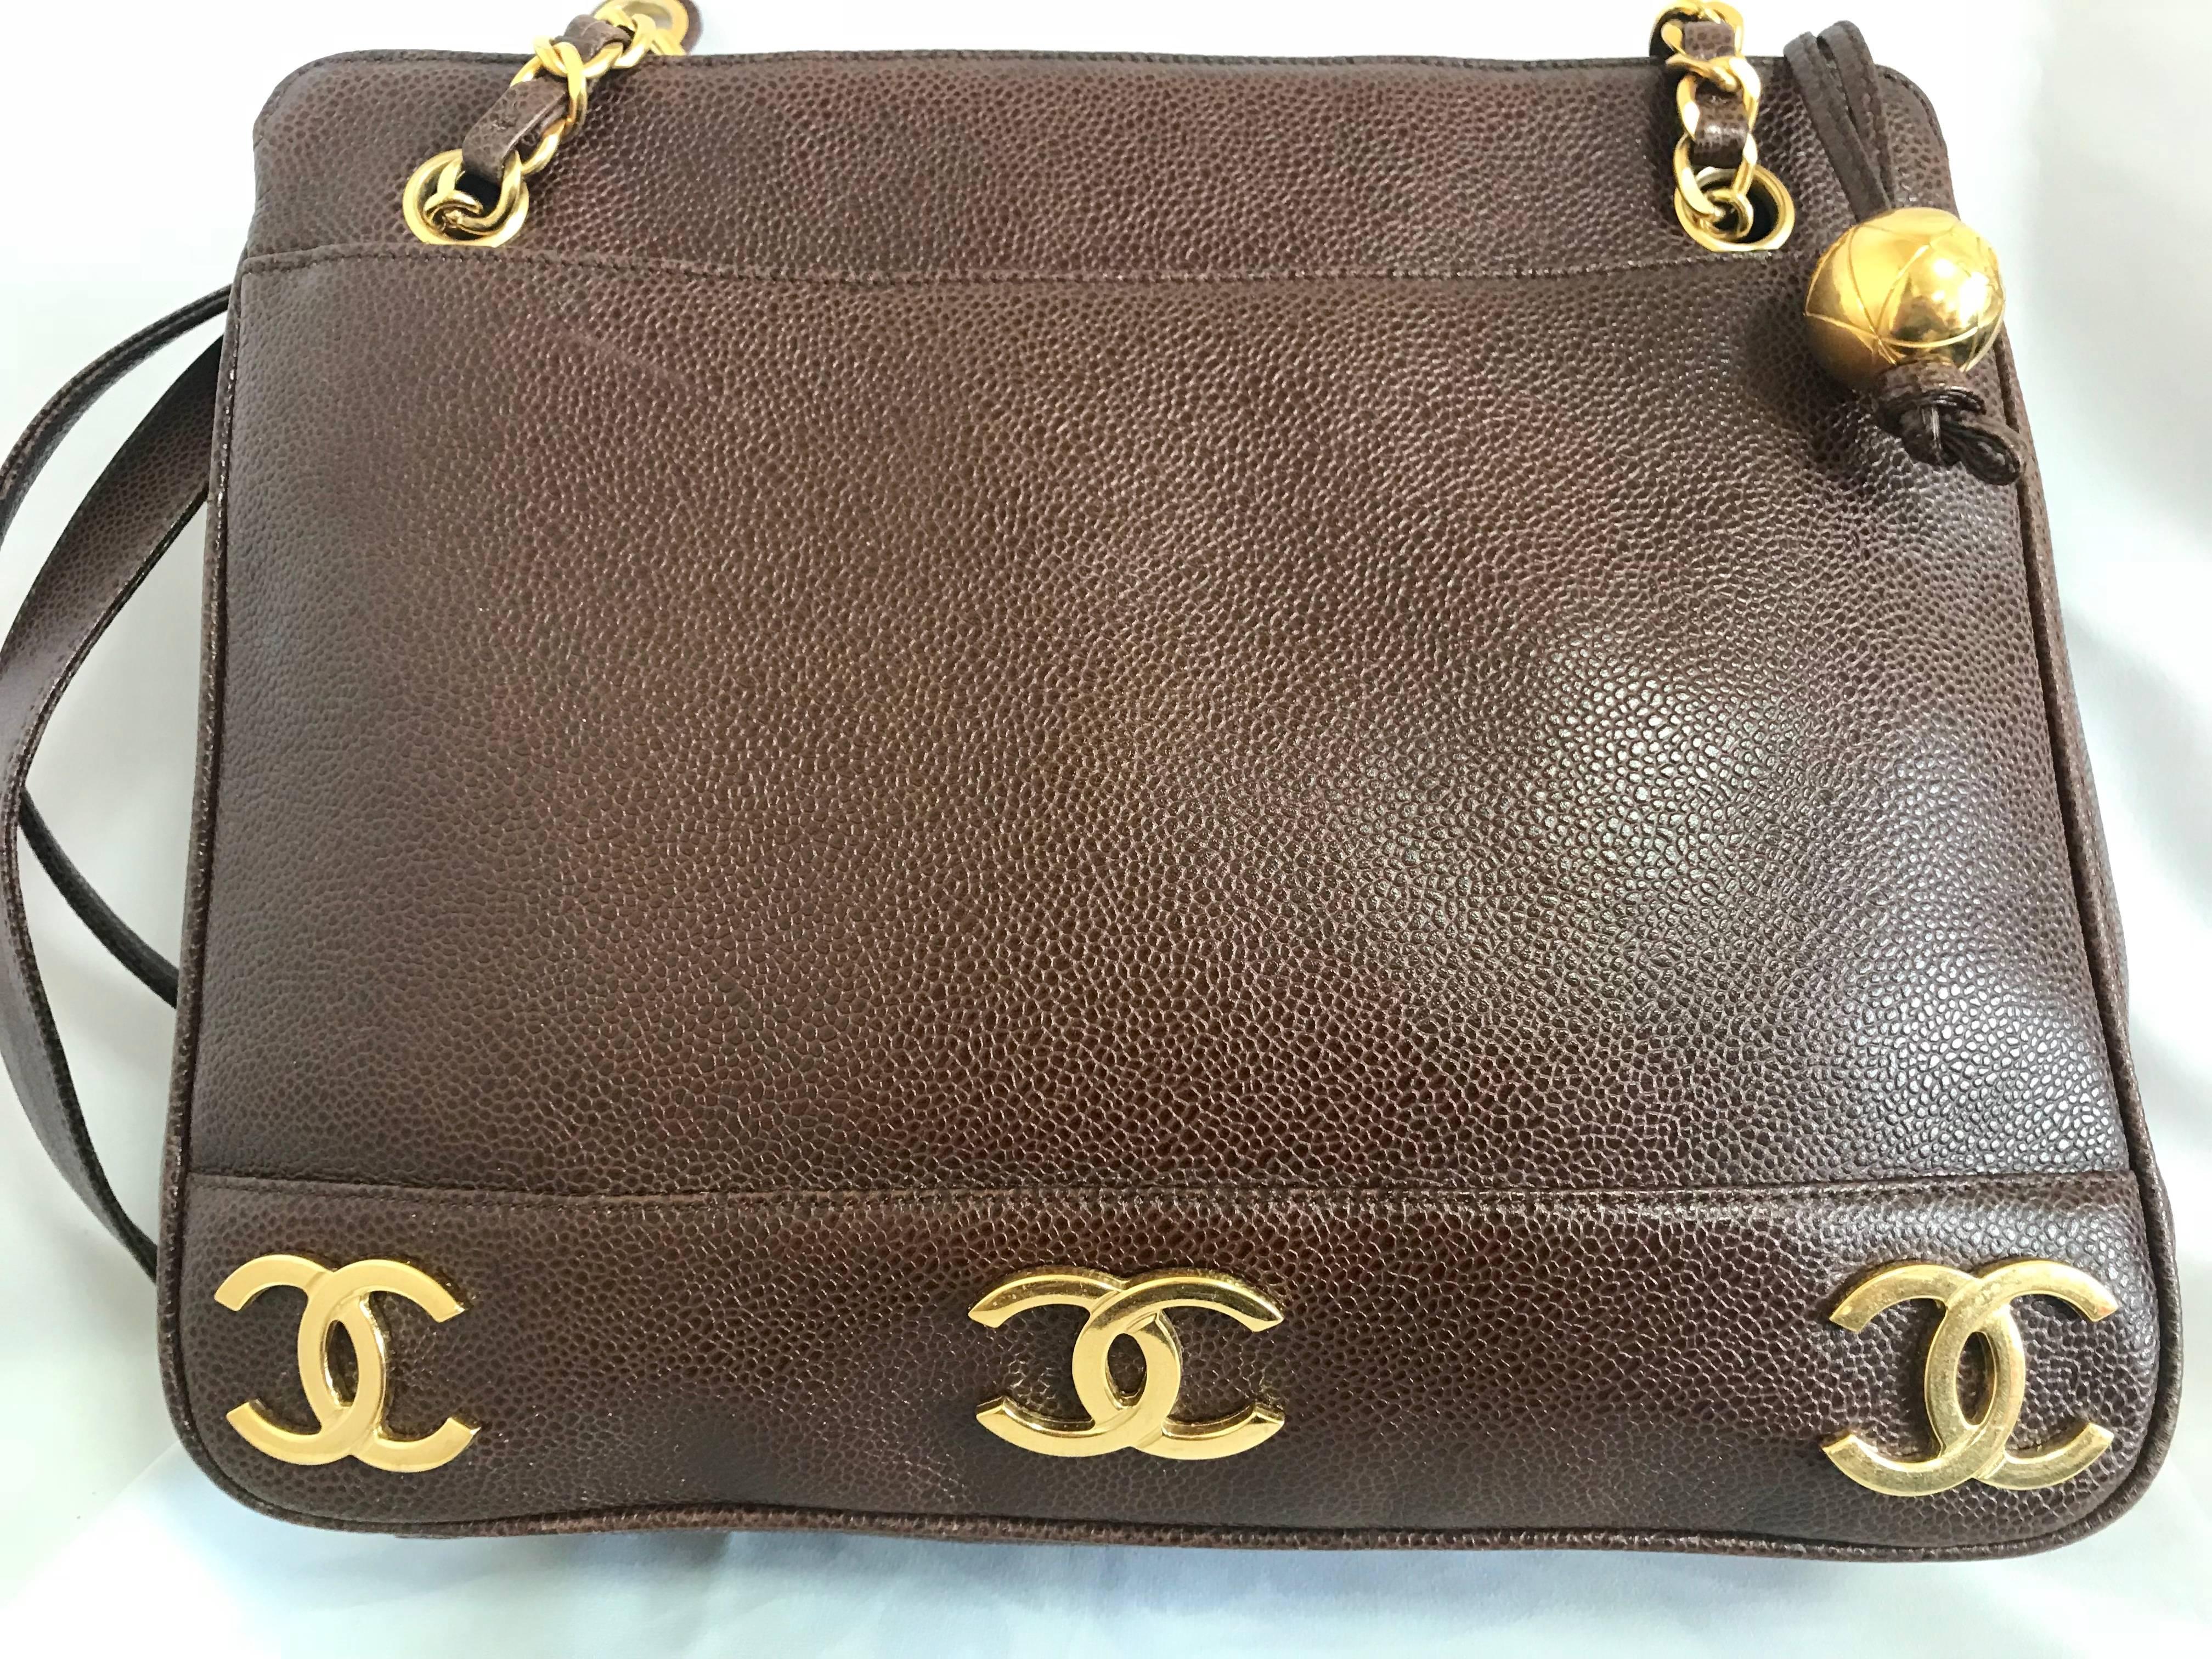 Vintage CHANEL brown caviar leather chain shoulder bag with 3 golden CC marks. For Sale 1